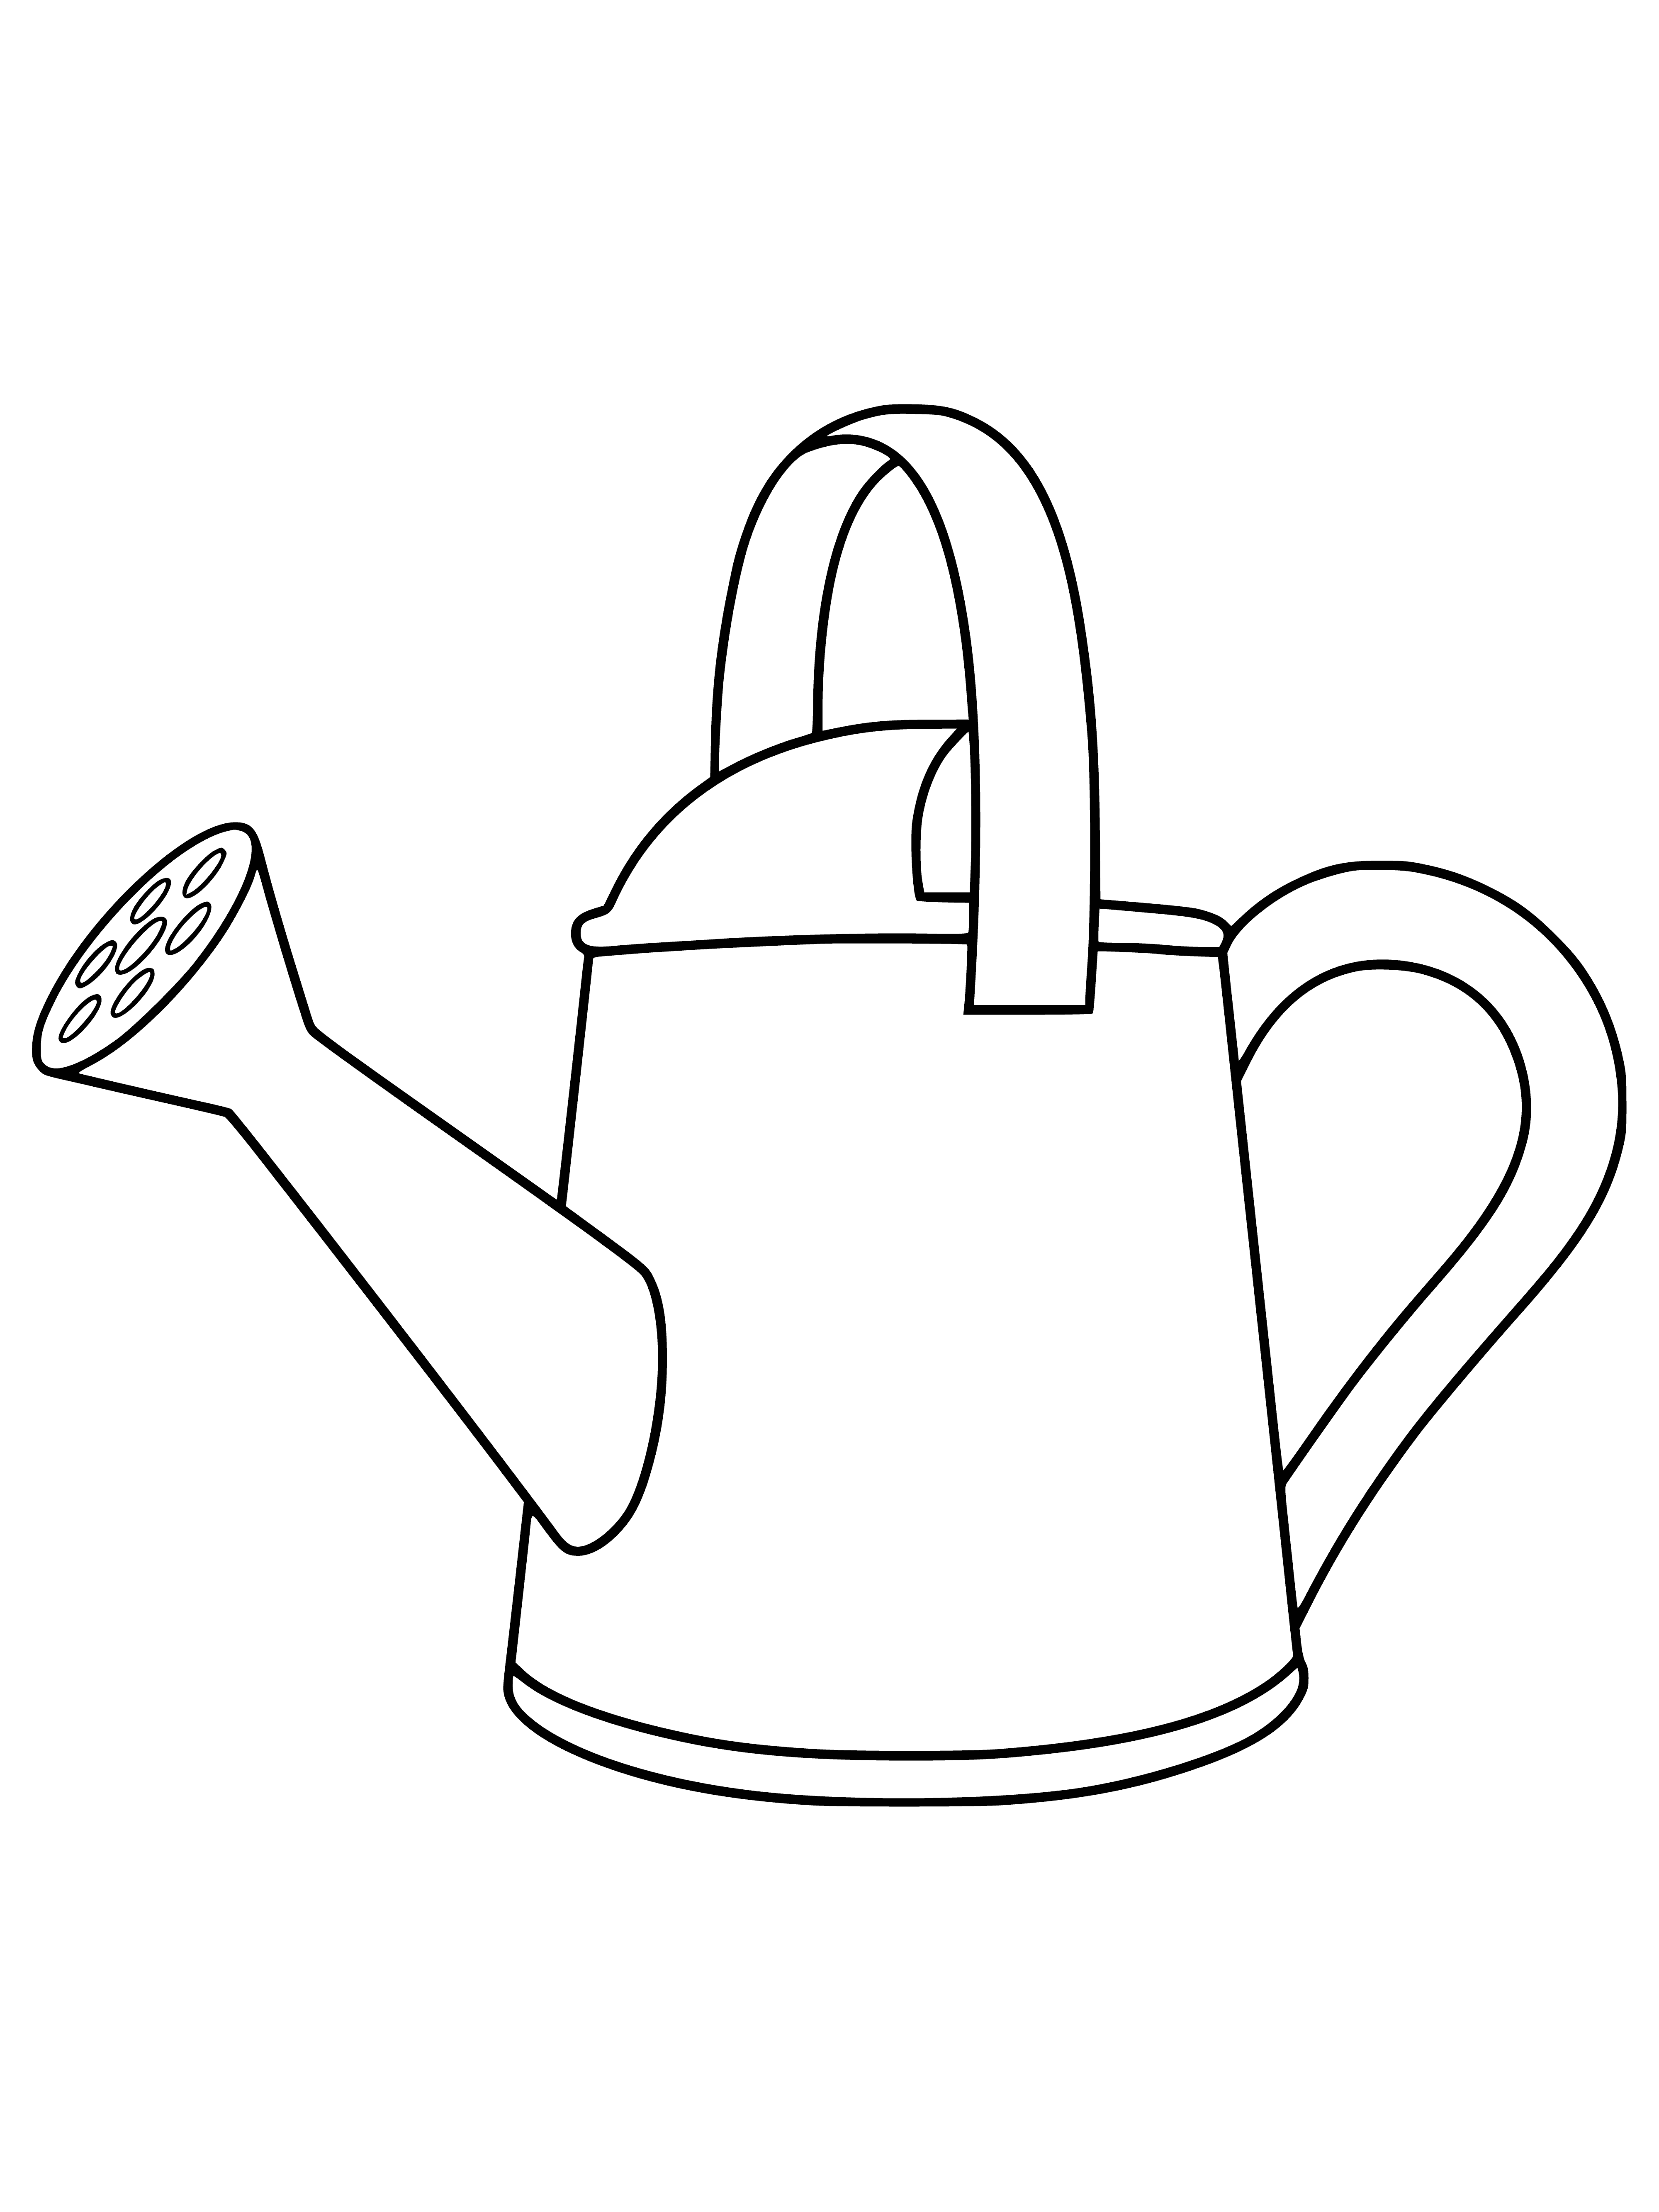 Watering can coloring page